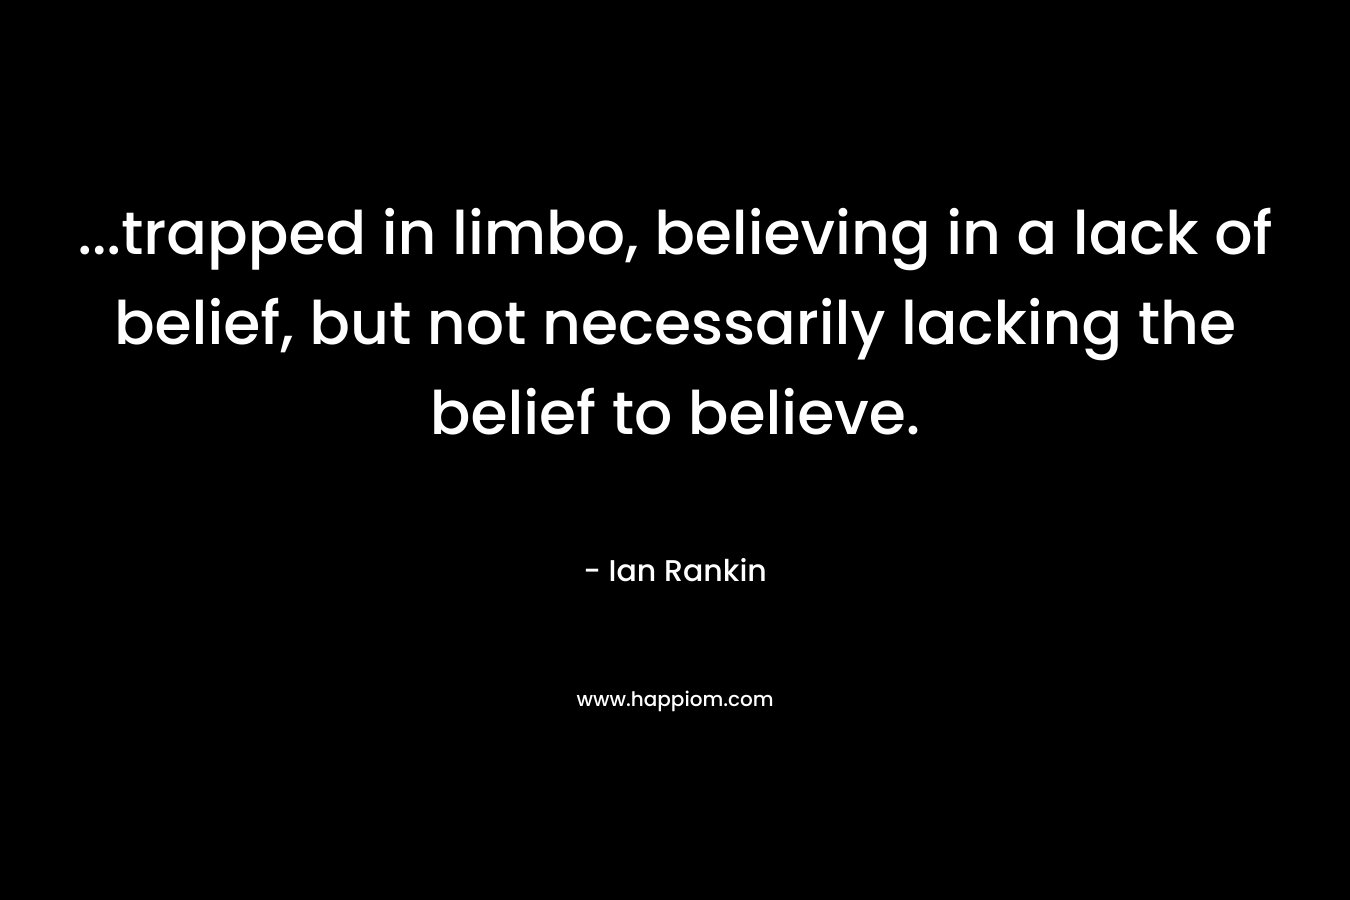 …trapped in limbo, believing in a lack of belief, but not necessarily lacking the belief to believe. – Ian Rankin